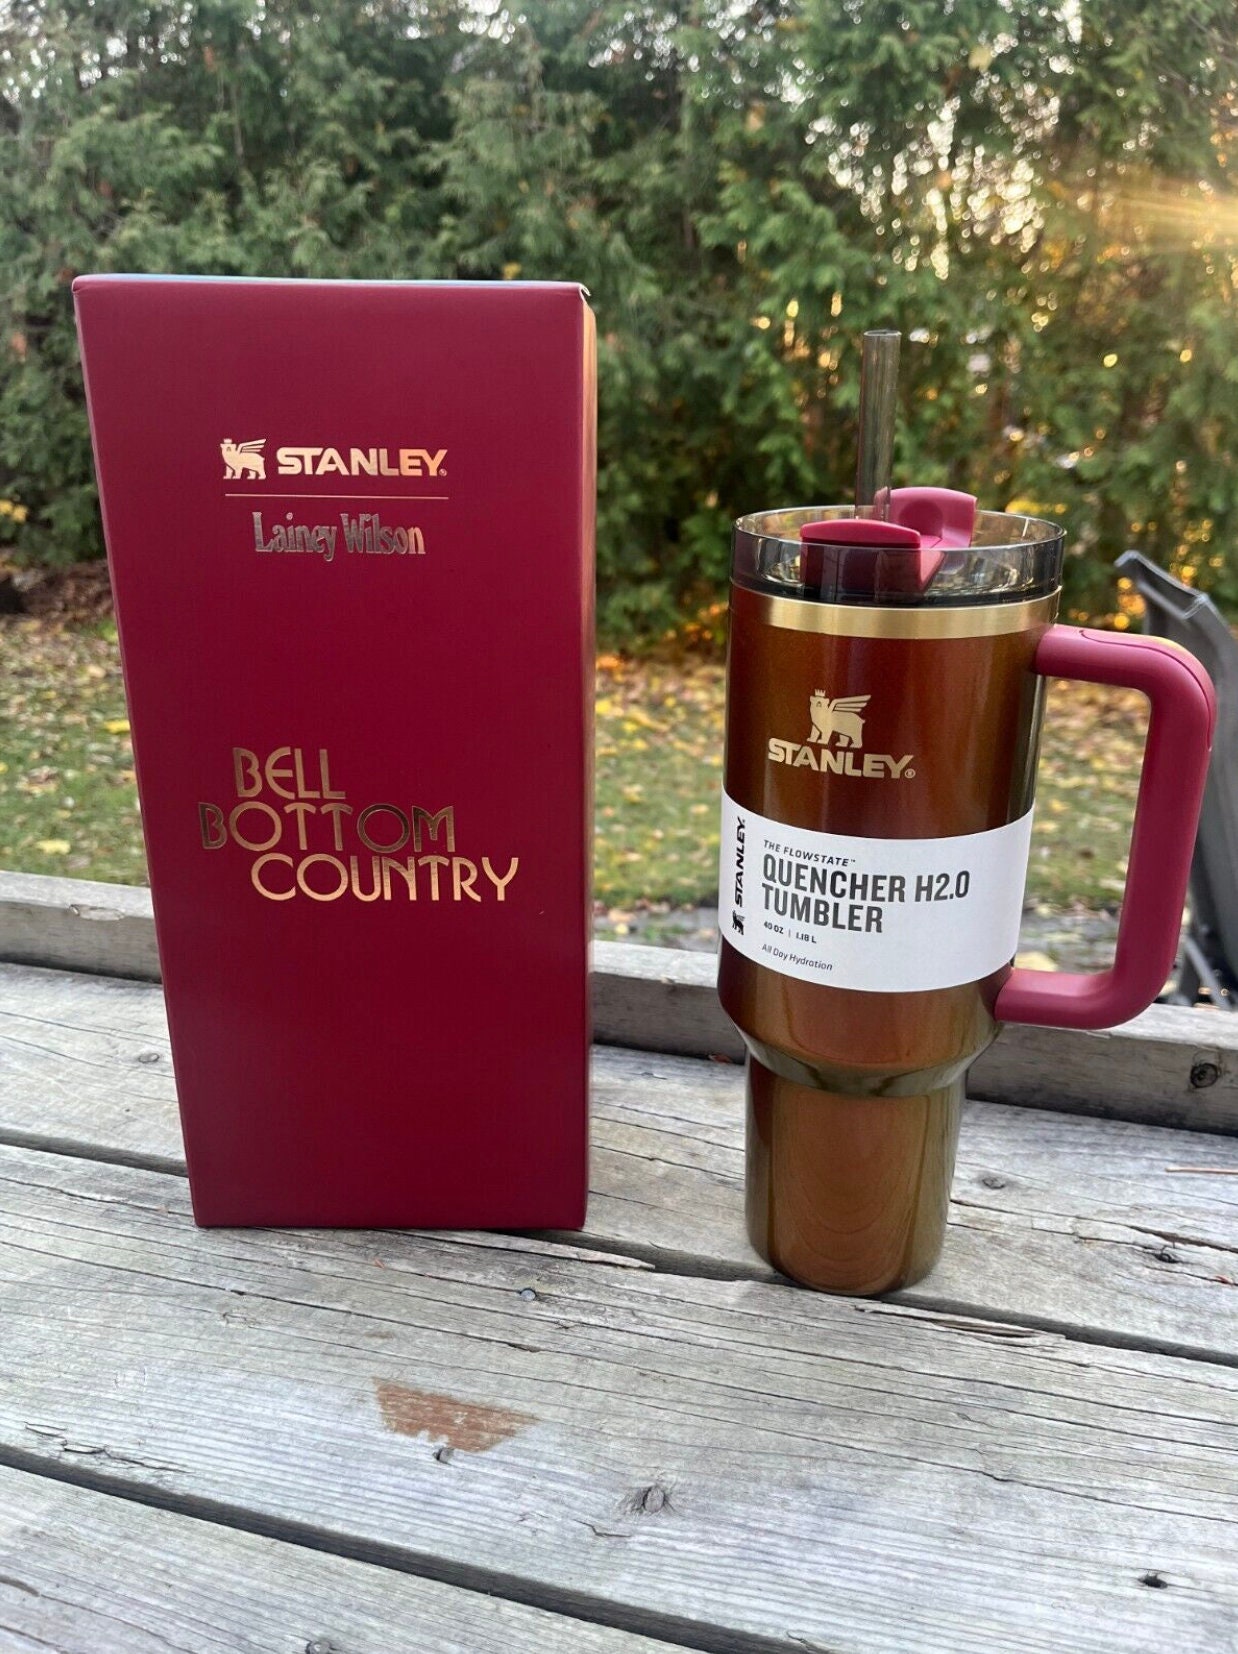 Stanley, Dining, Limited Edition Lainey Wilson Stanley 4oz Tumbler